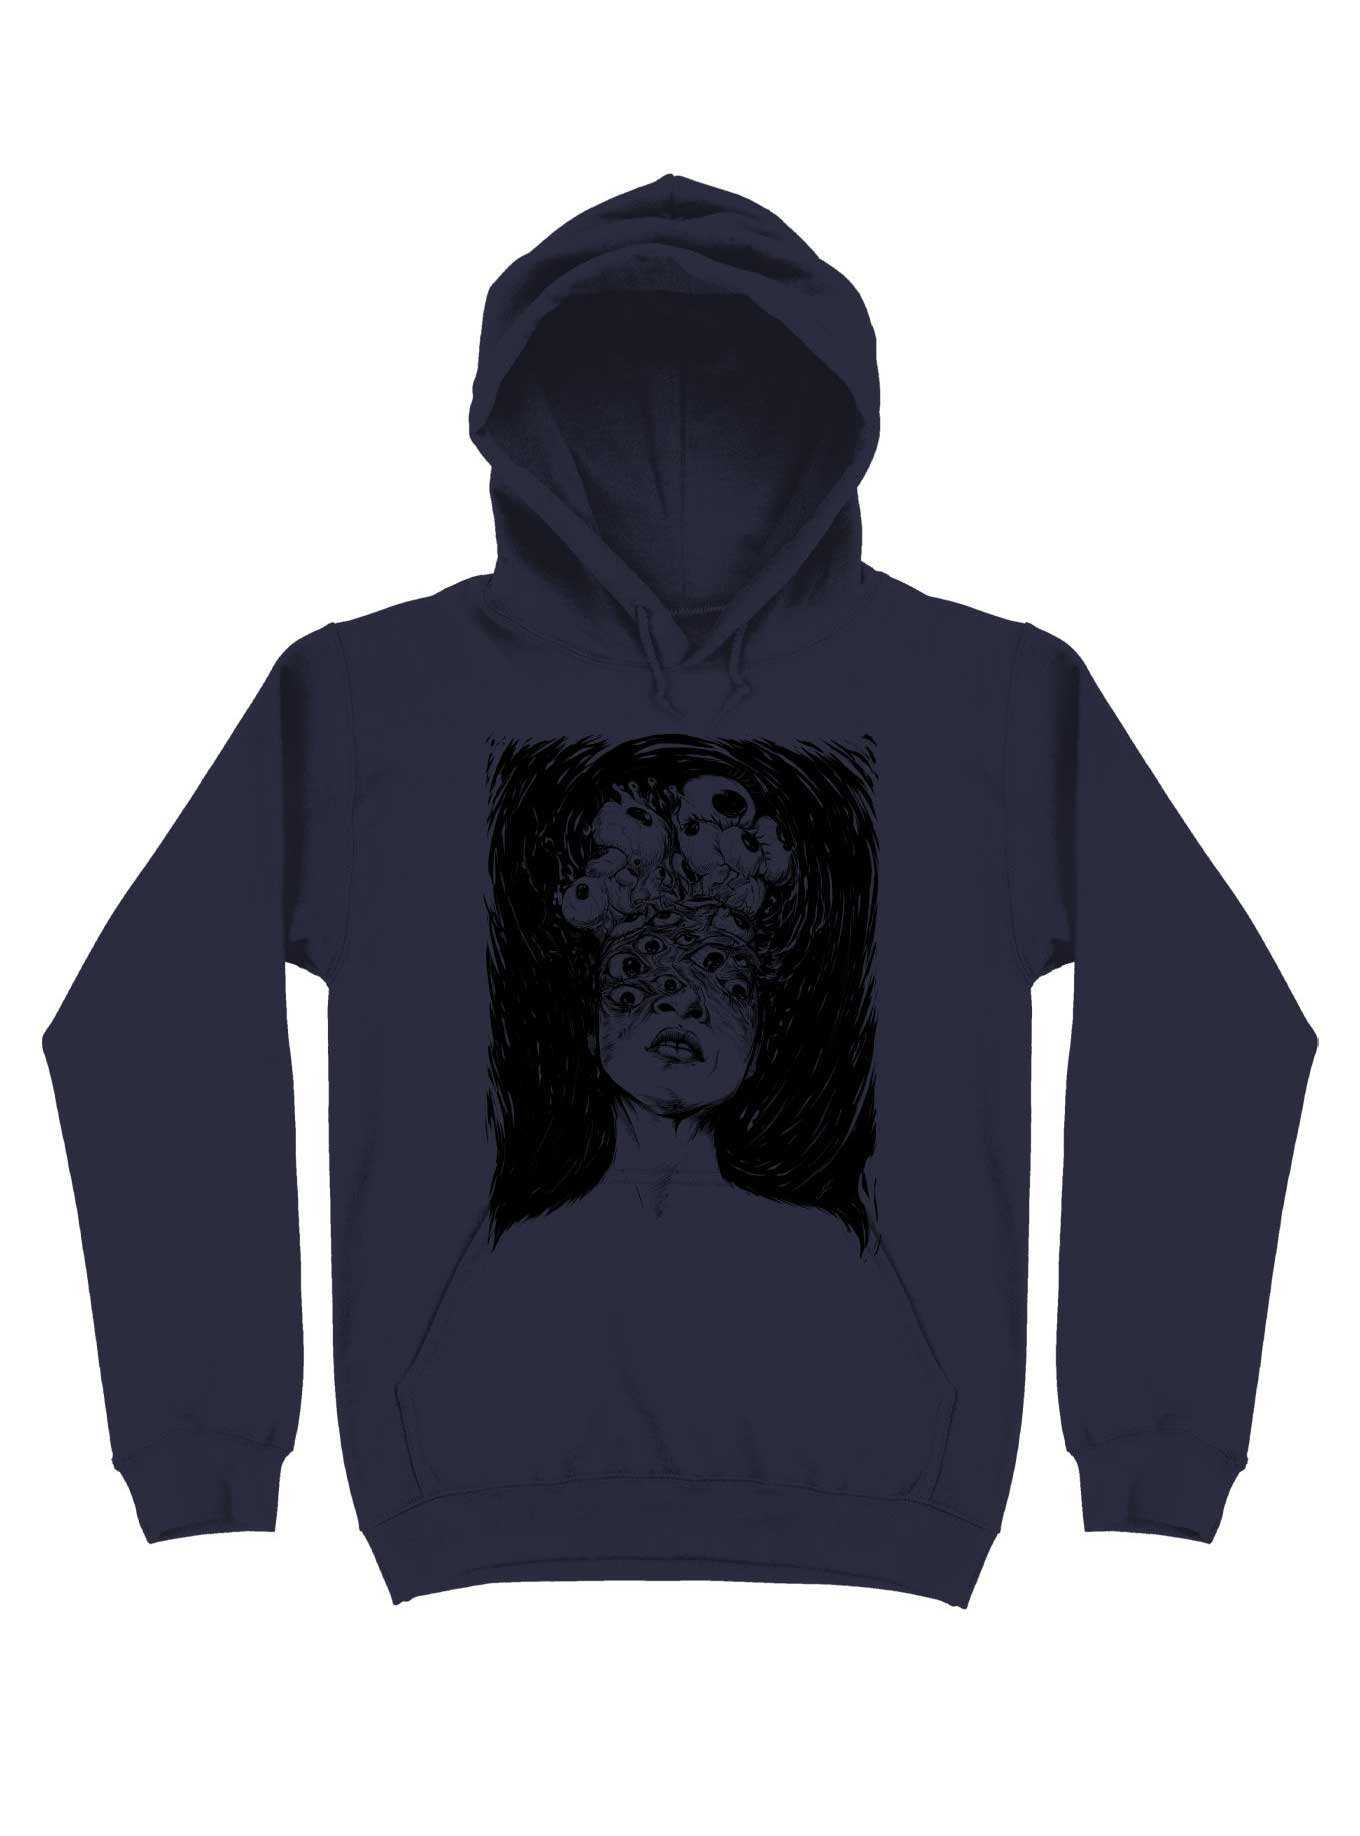 Black History Month Worst Creations The Witnesser Hoodie, , hi-res